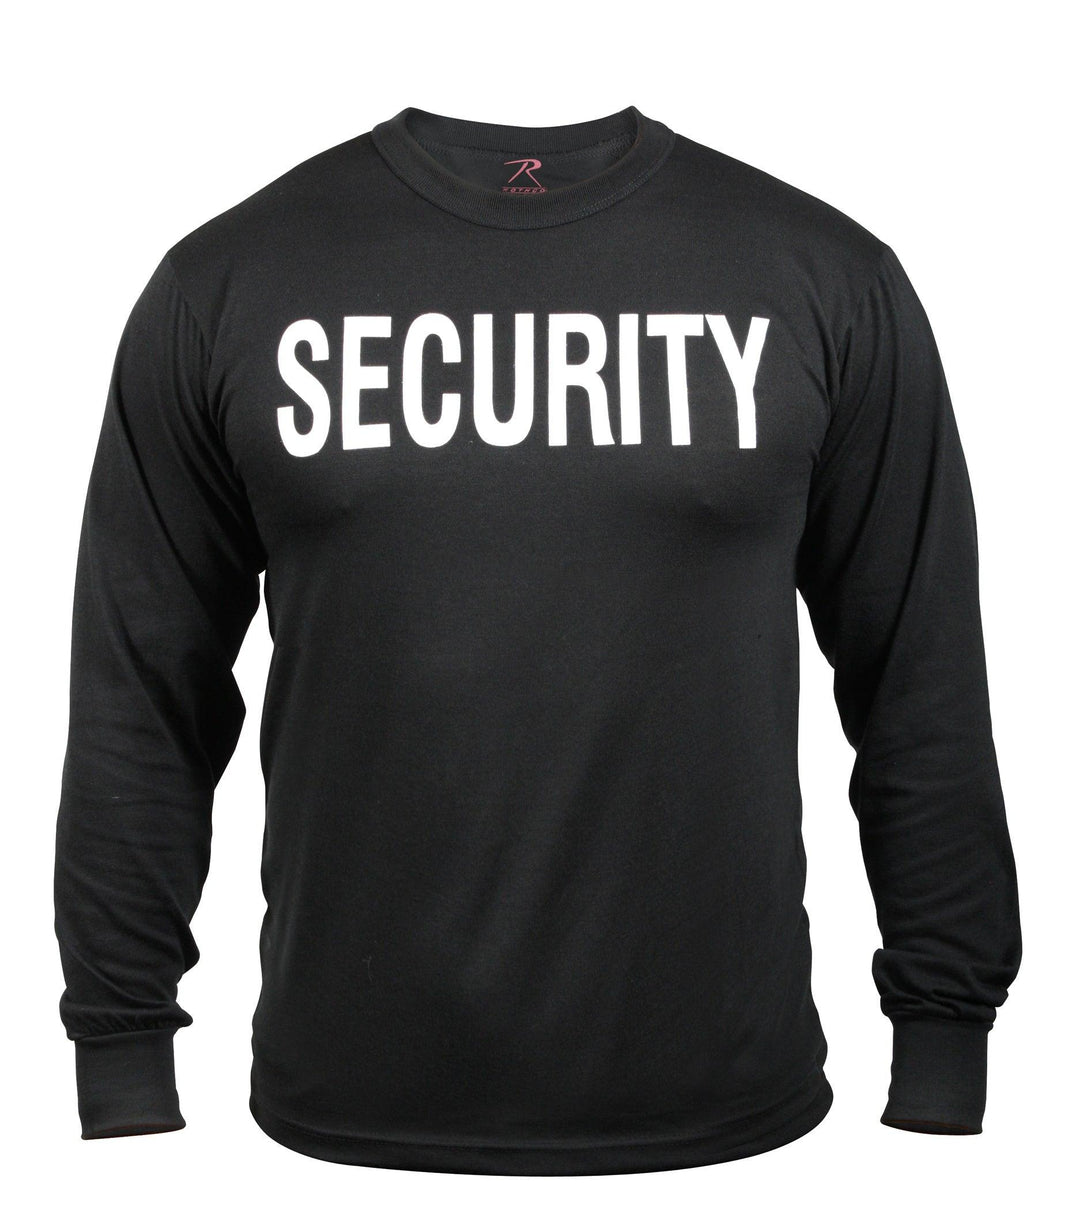 2-Sided Security Long Sleeve T-Shirt by Rothco - Legendary USA